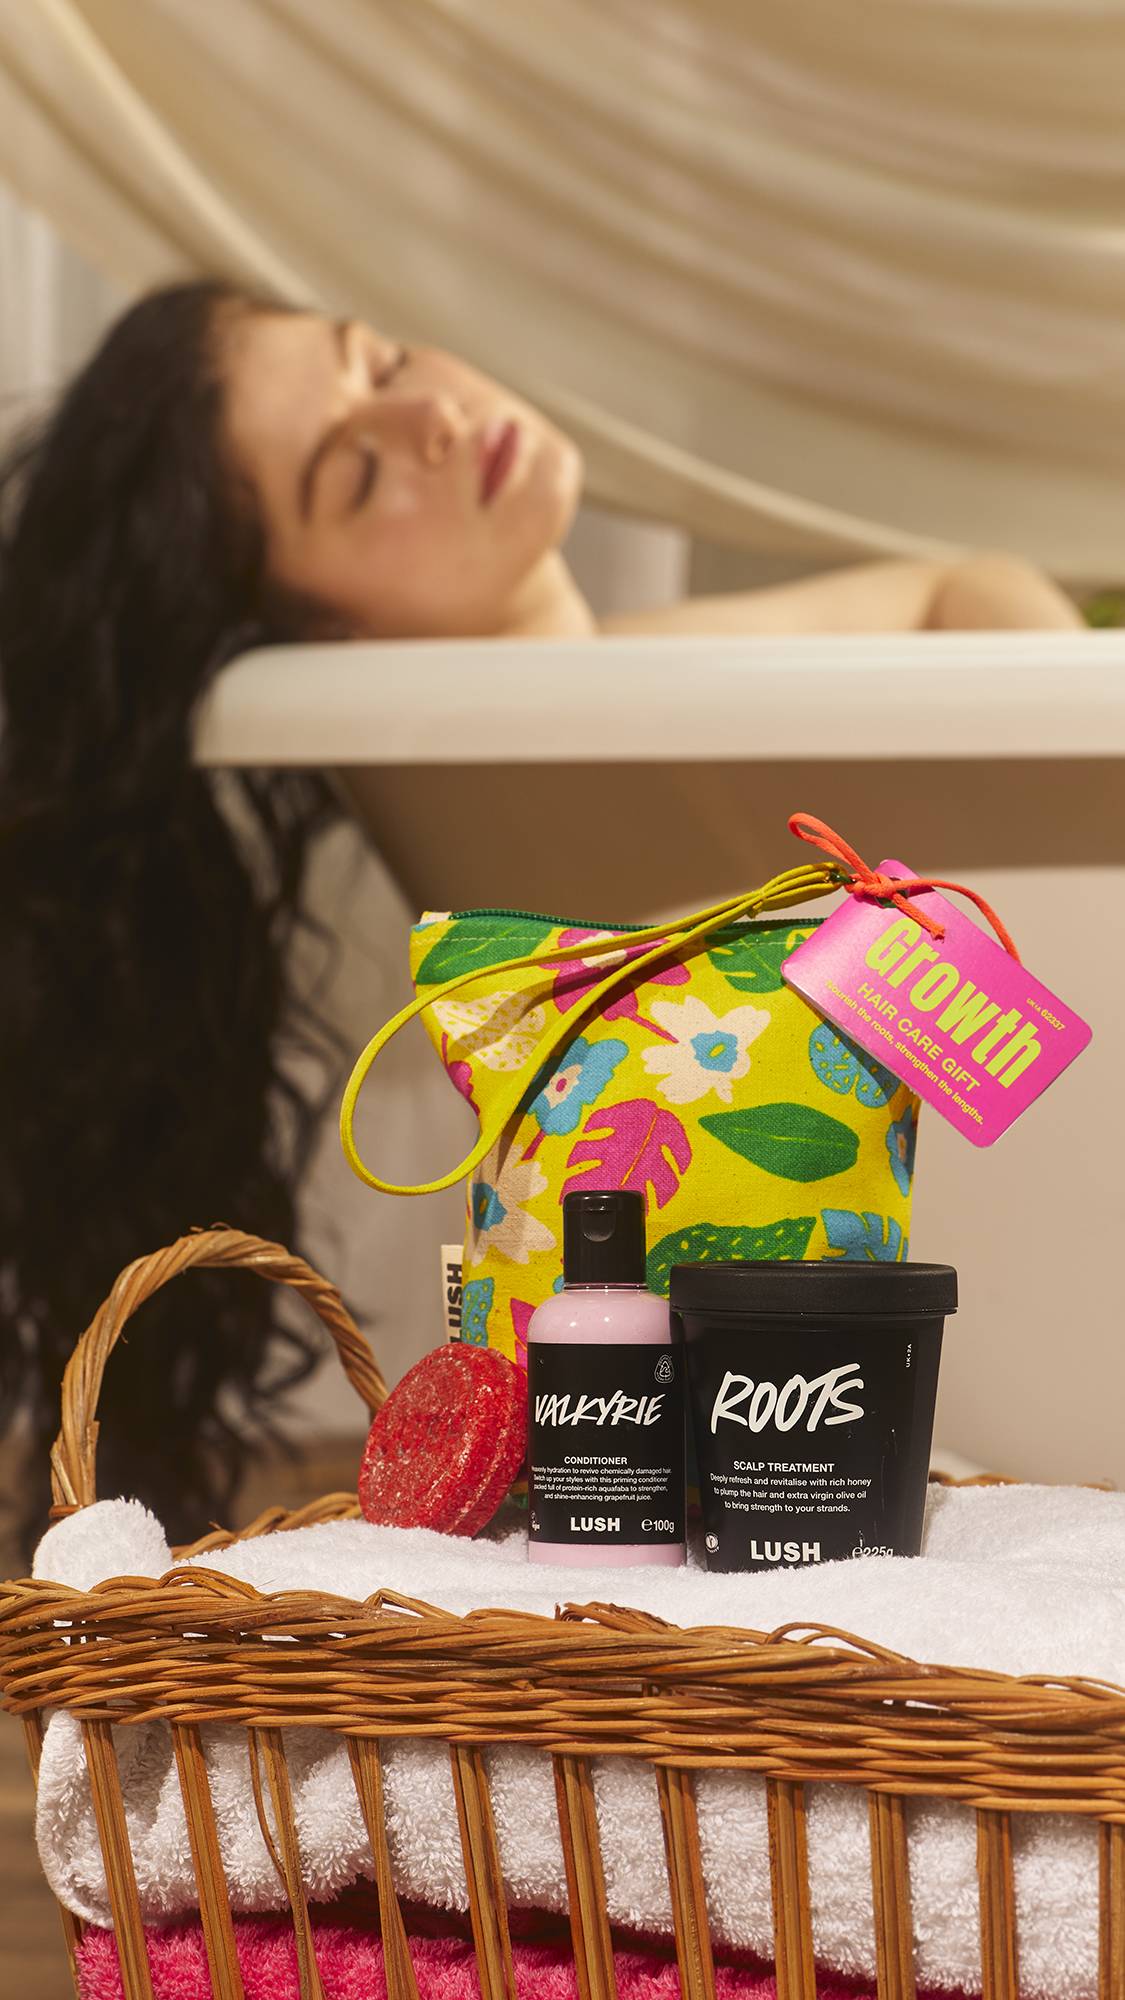 The model is laid in the bathtub relaxing in the blurred background as the foreground focuses on the haircare gift pouch and the included contents sat on a pile of folded towels. 